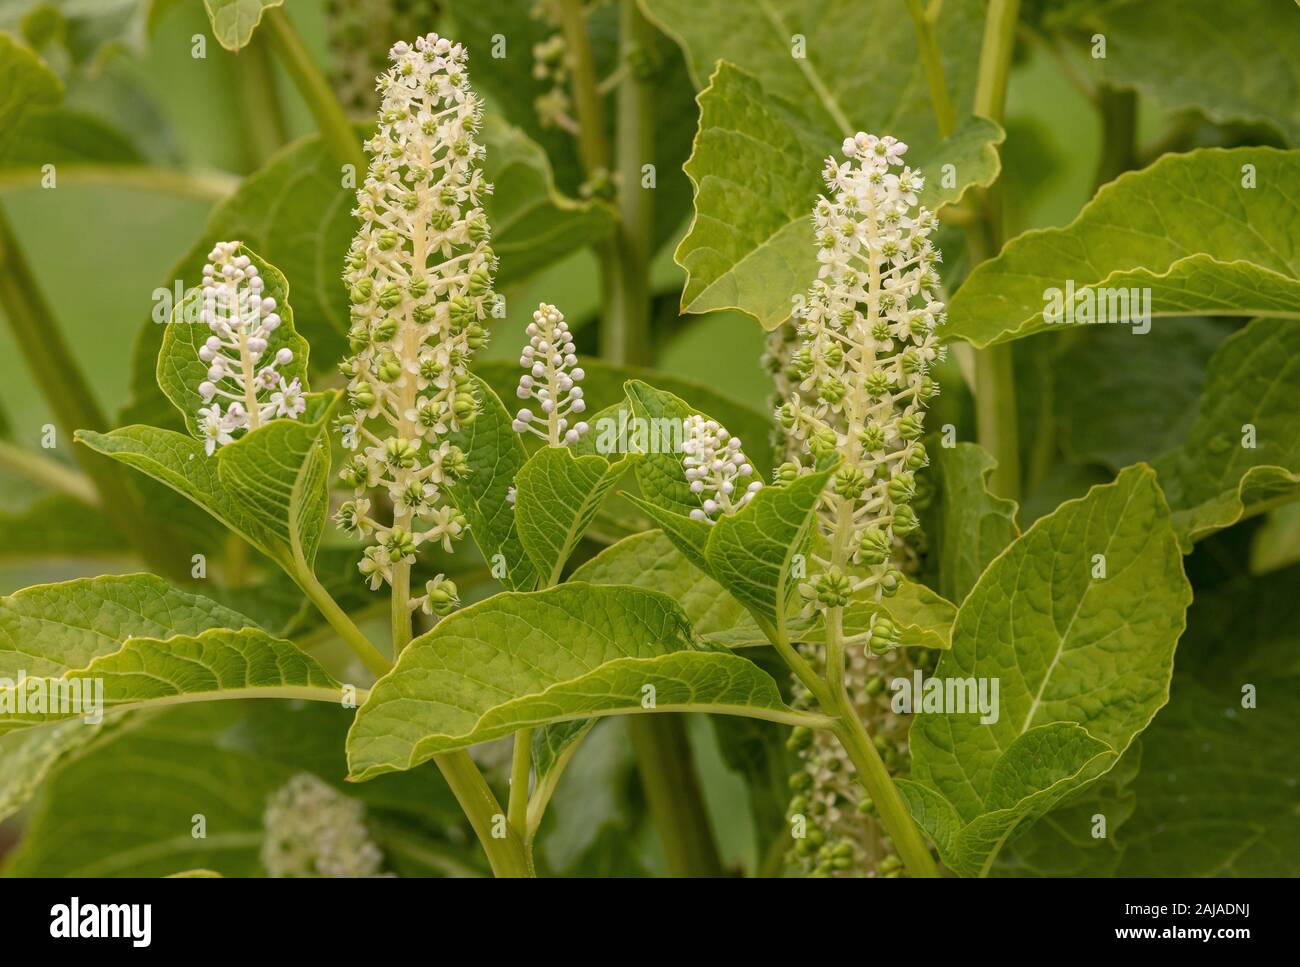 Indian Poke, Phytolacca acinosa, in flower. Toxic and medicinal plant. Stock Photo